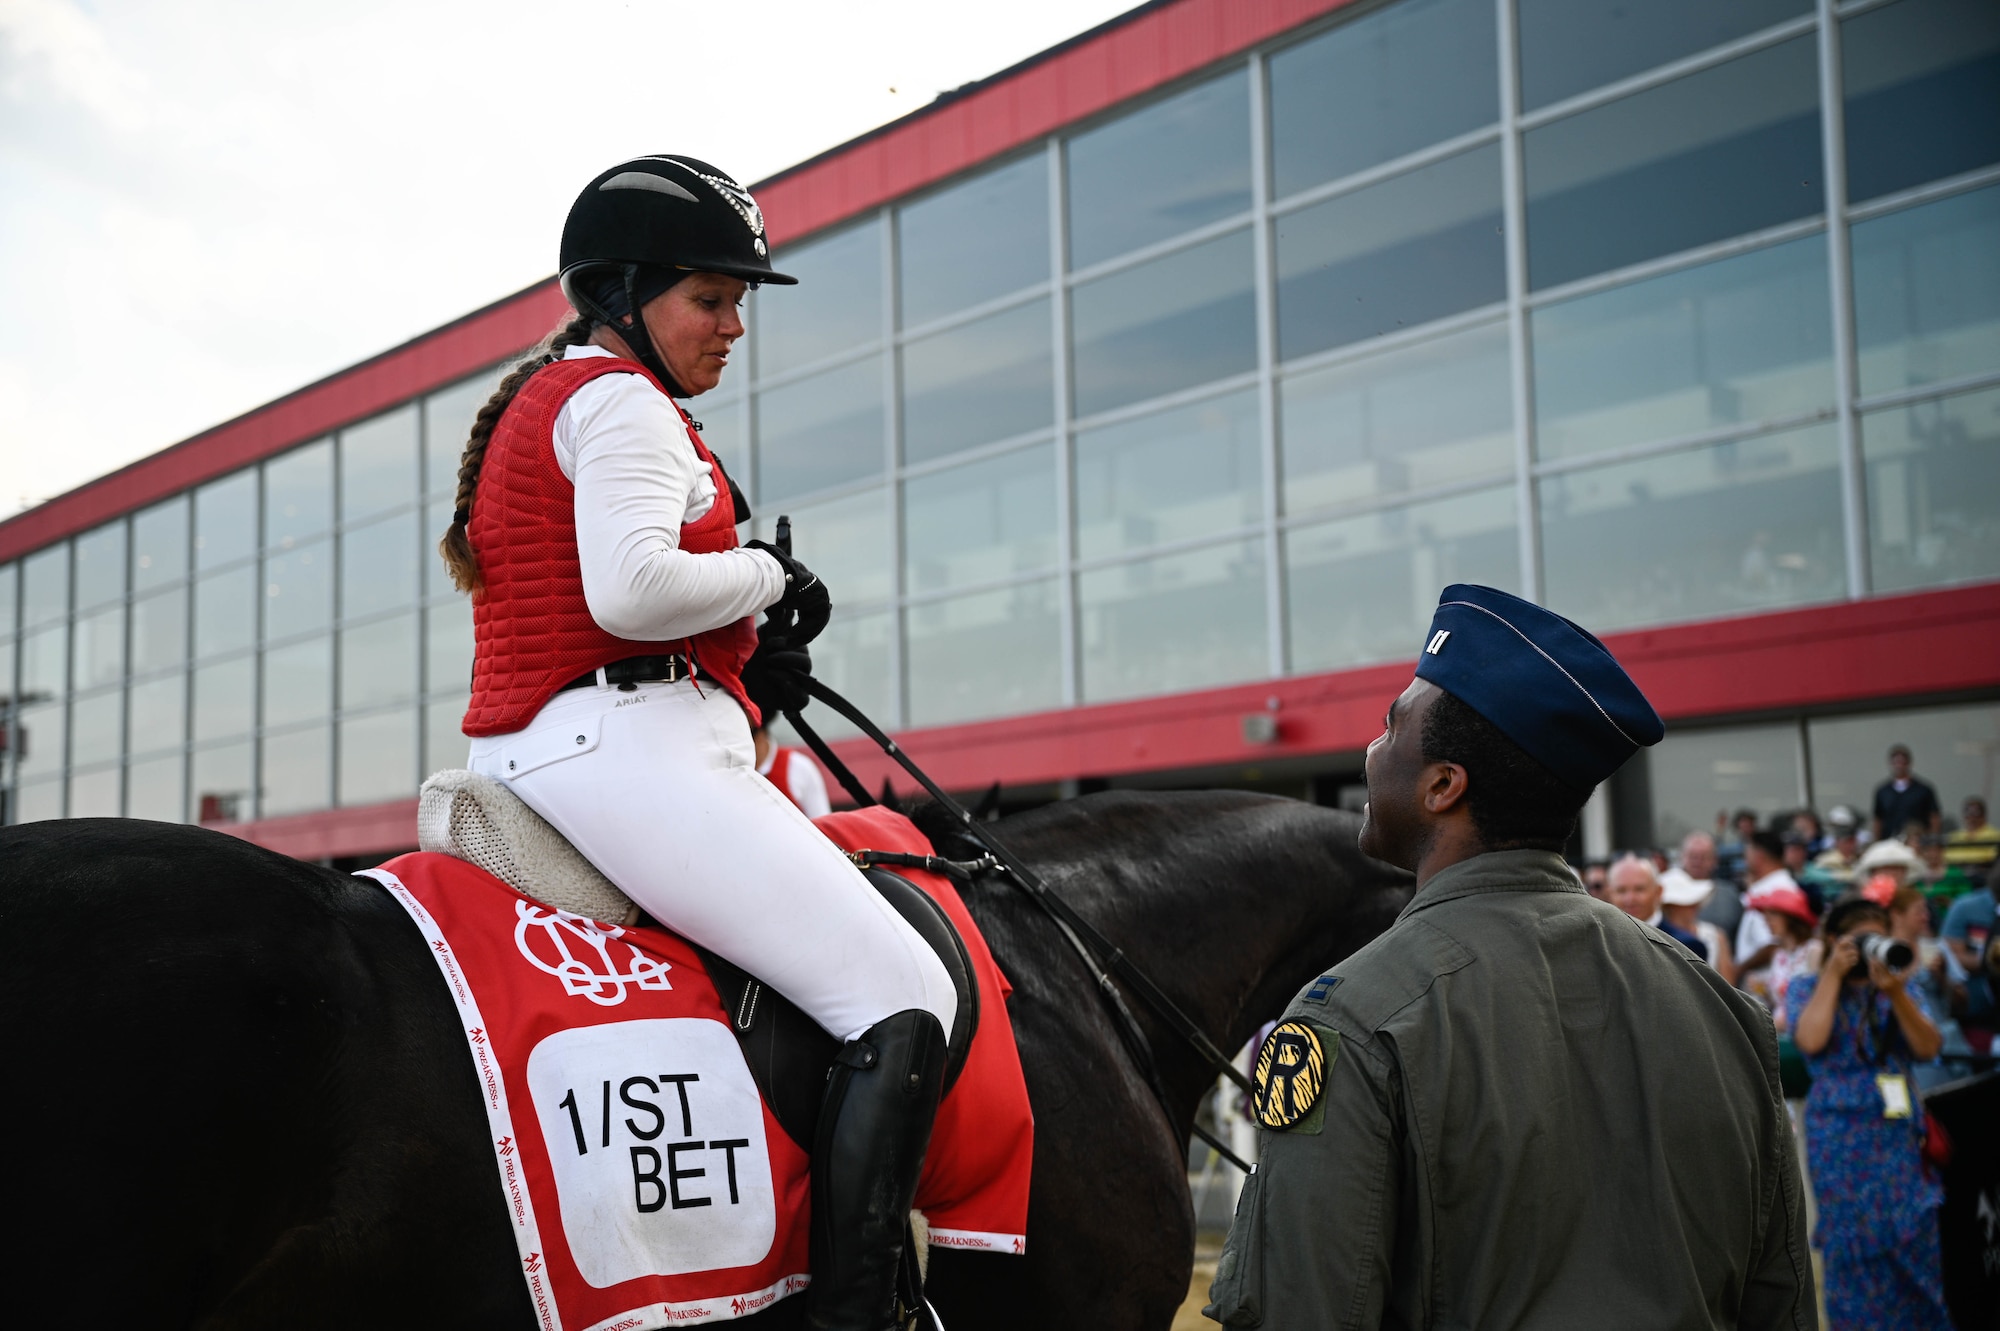 A U.S. Air Force B-2 Spirit pilot talks to Preakness Stakes attendees at the Pimlico race course, Baltimore, Maryland, May 21, 2022. The Preakness Stakes is an American thoroughbred horse race held on the third Saturday in May each year in Baltimore, Maryland.